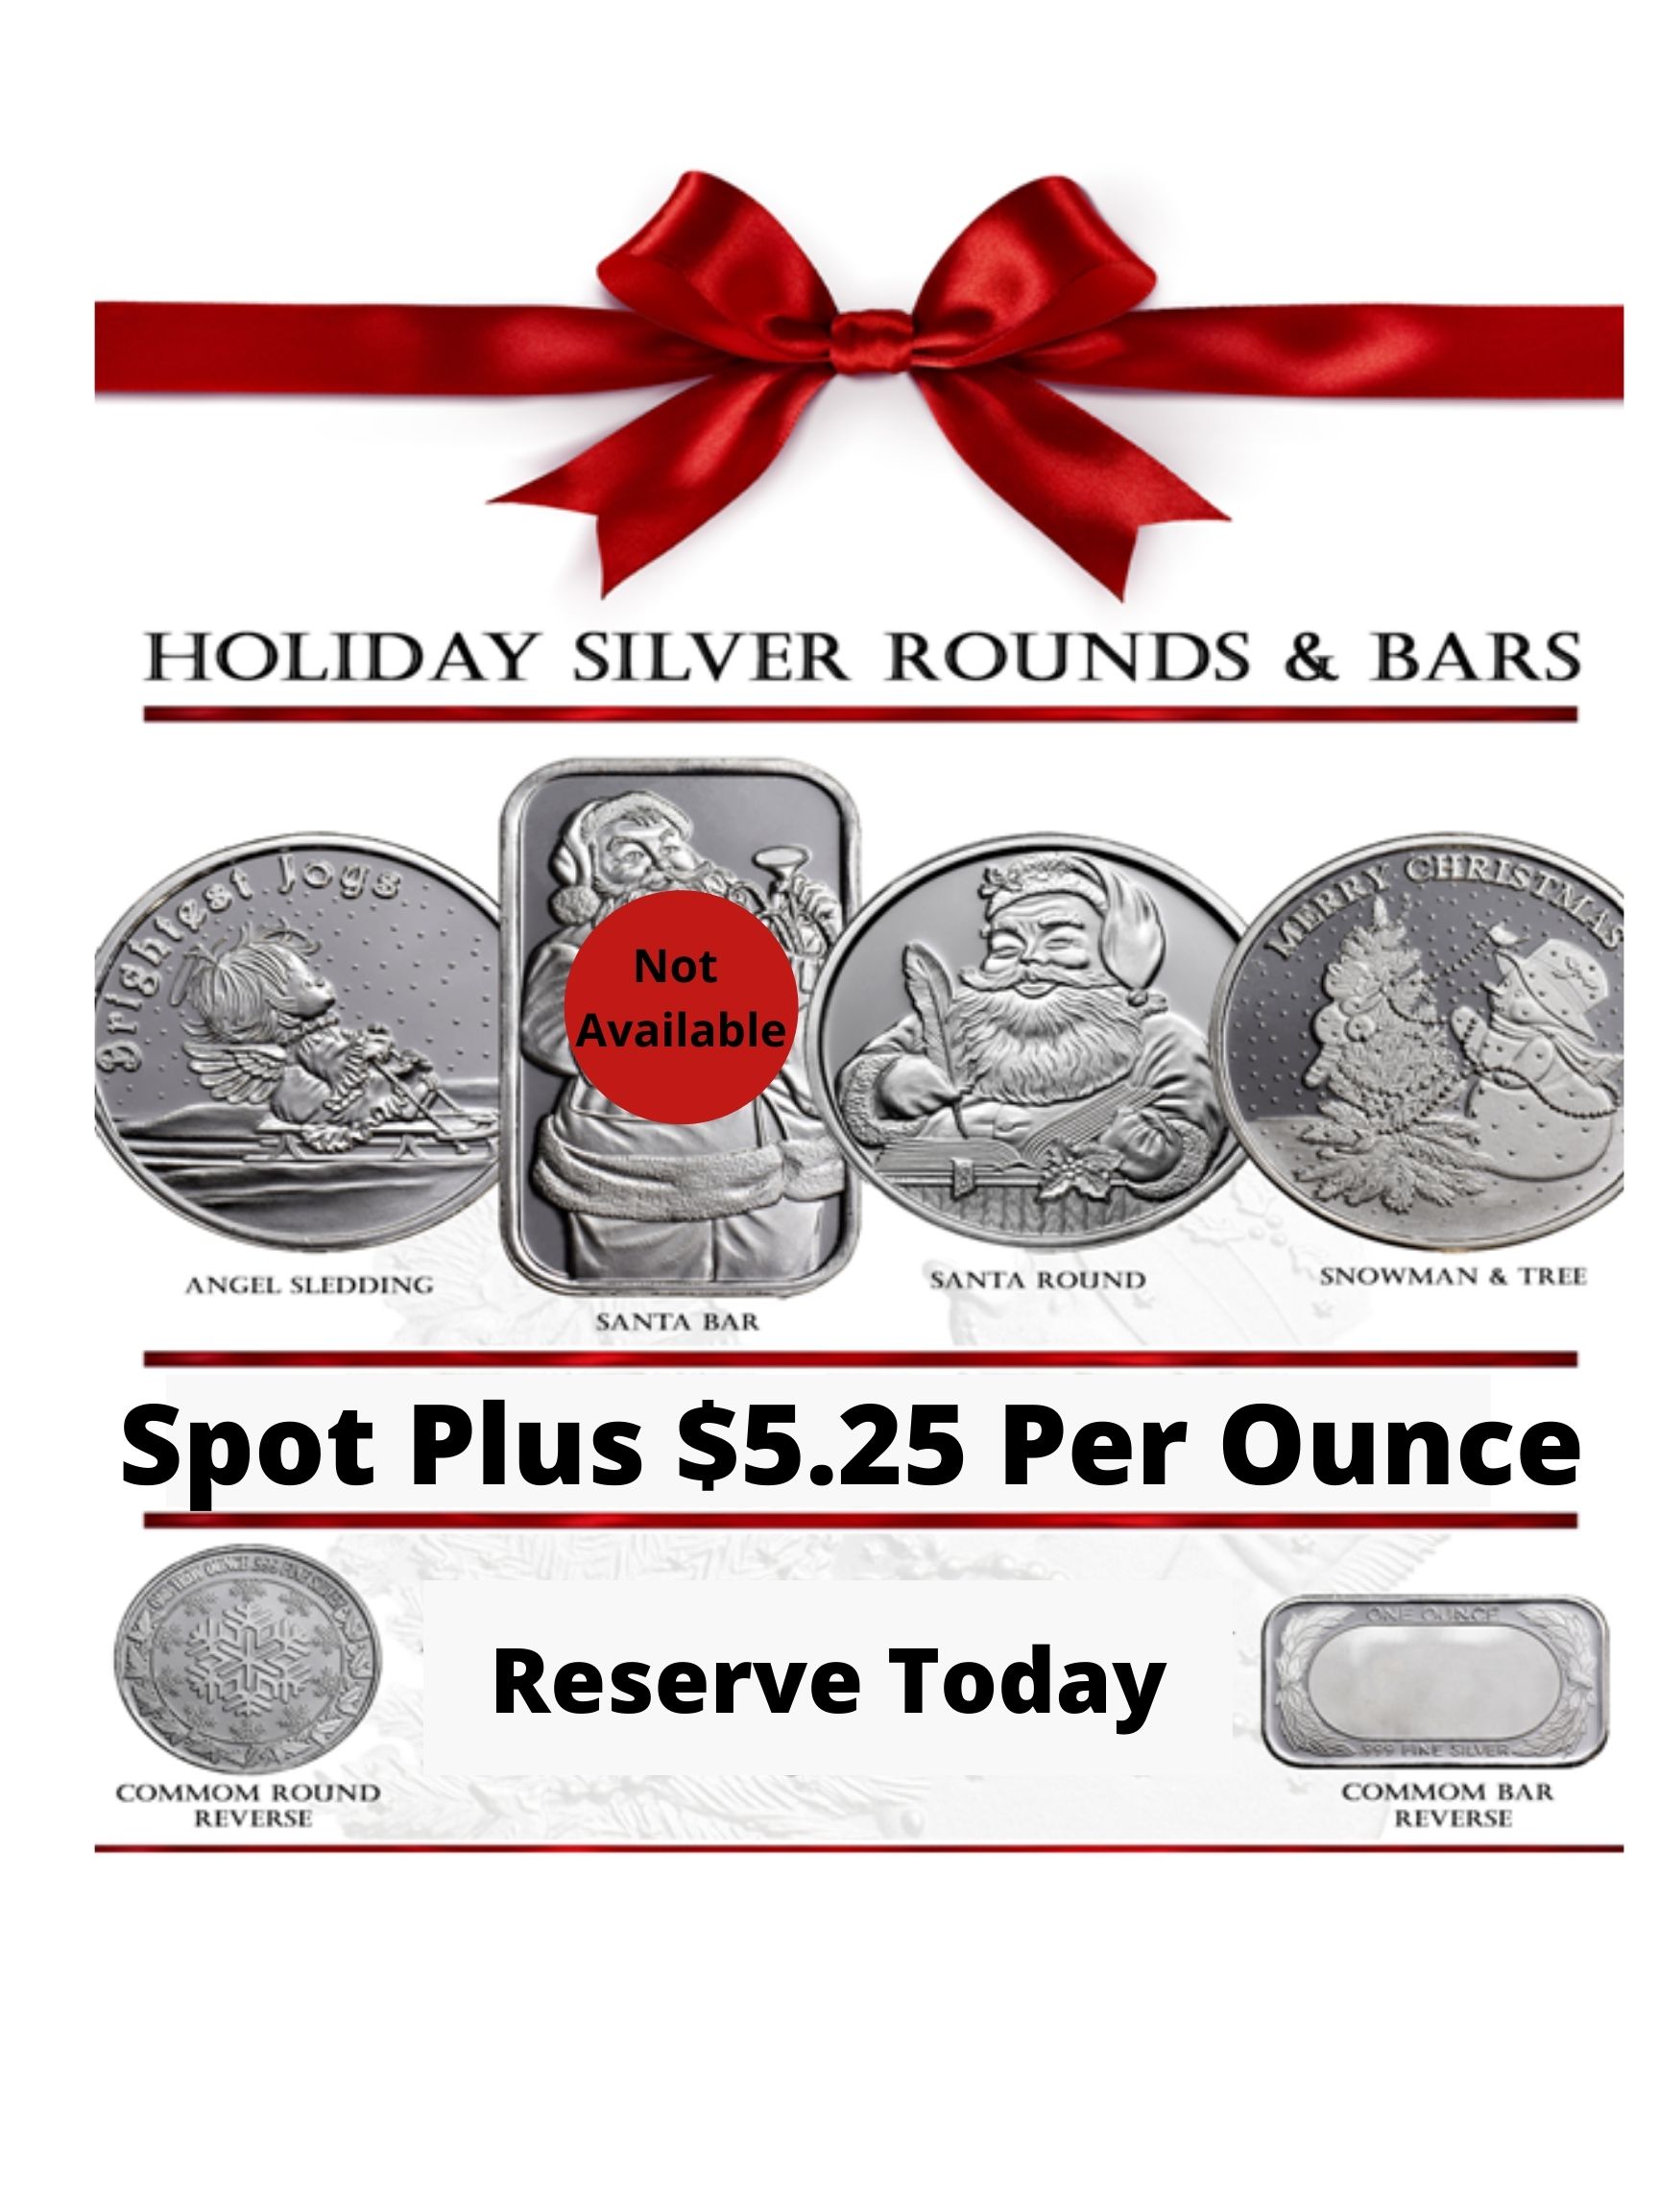 Christmas Silver Rounds Now Available Limited Quantities California